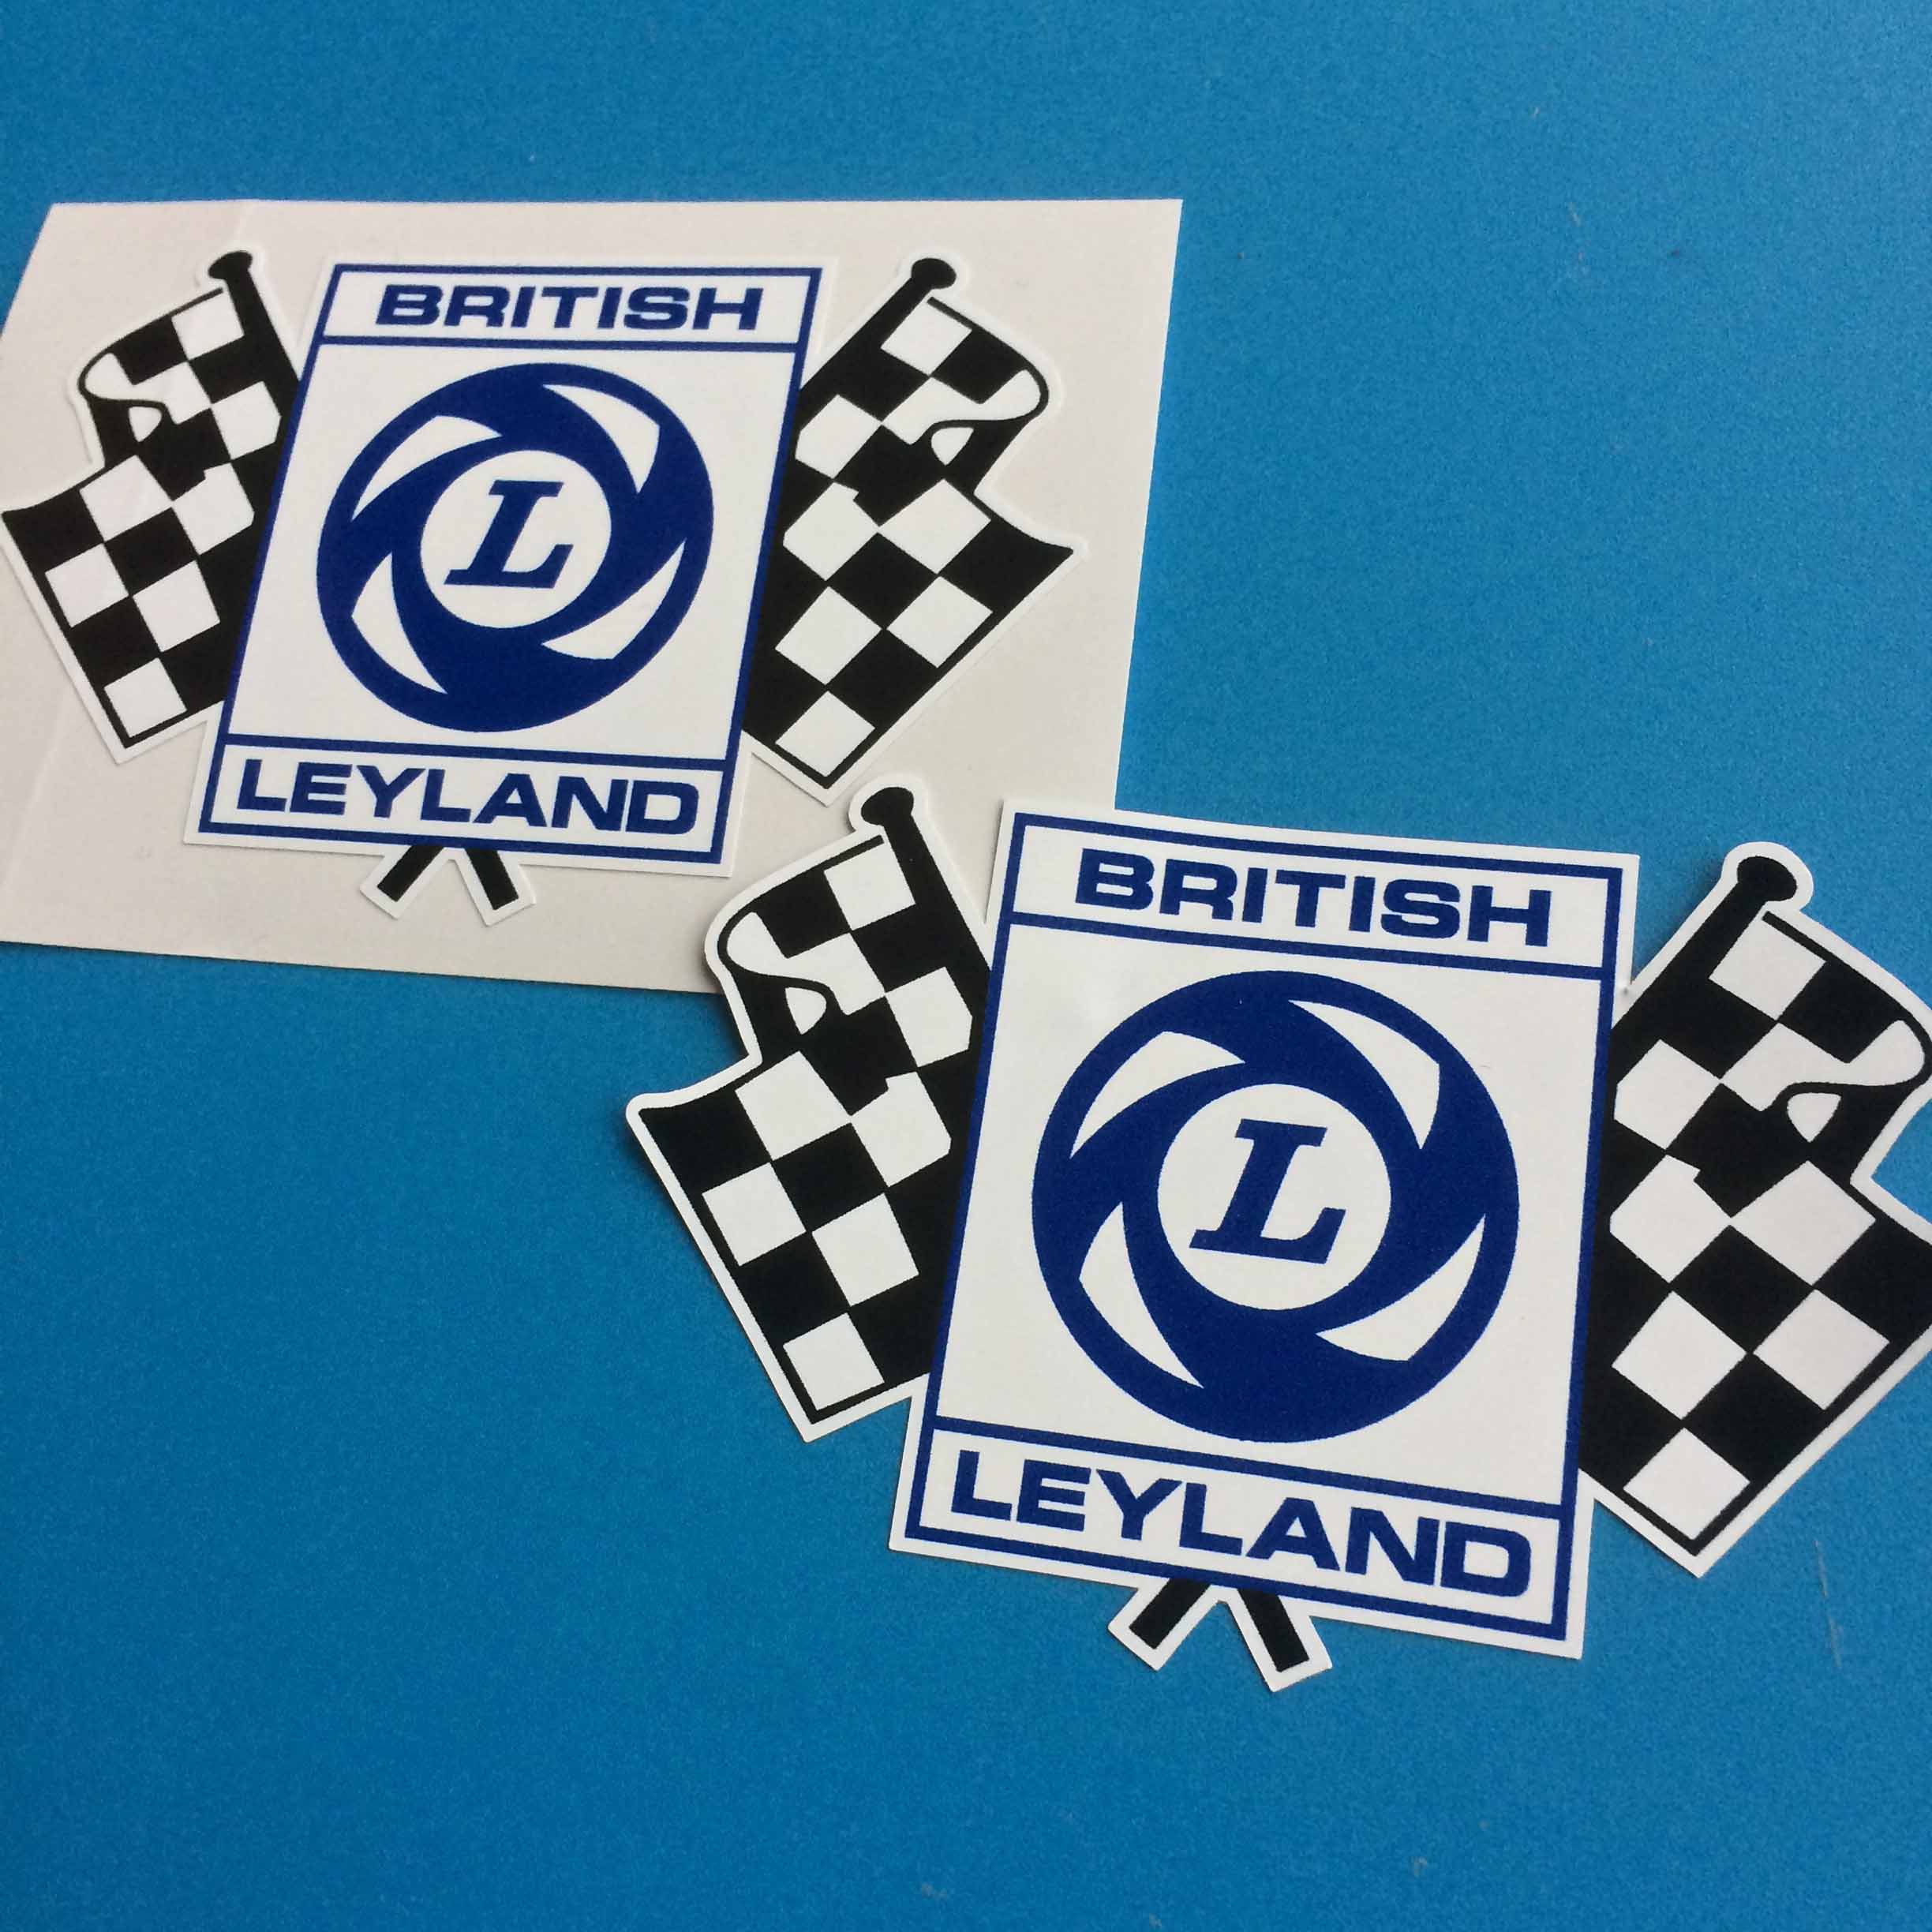 BRITISH LEYLAND CHEQUERED FLAG STICKERS. Two black and white chequered crossed flags In front of the flags is the blue and white L logo and the words British Leyland in blue.